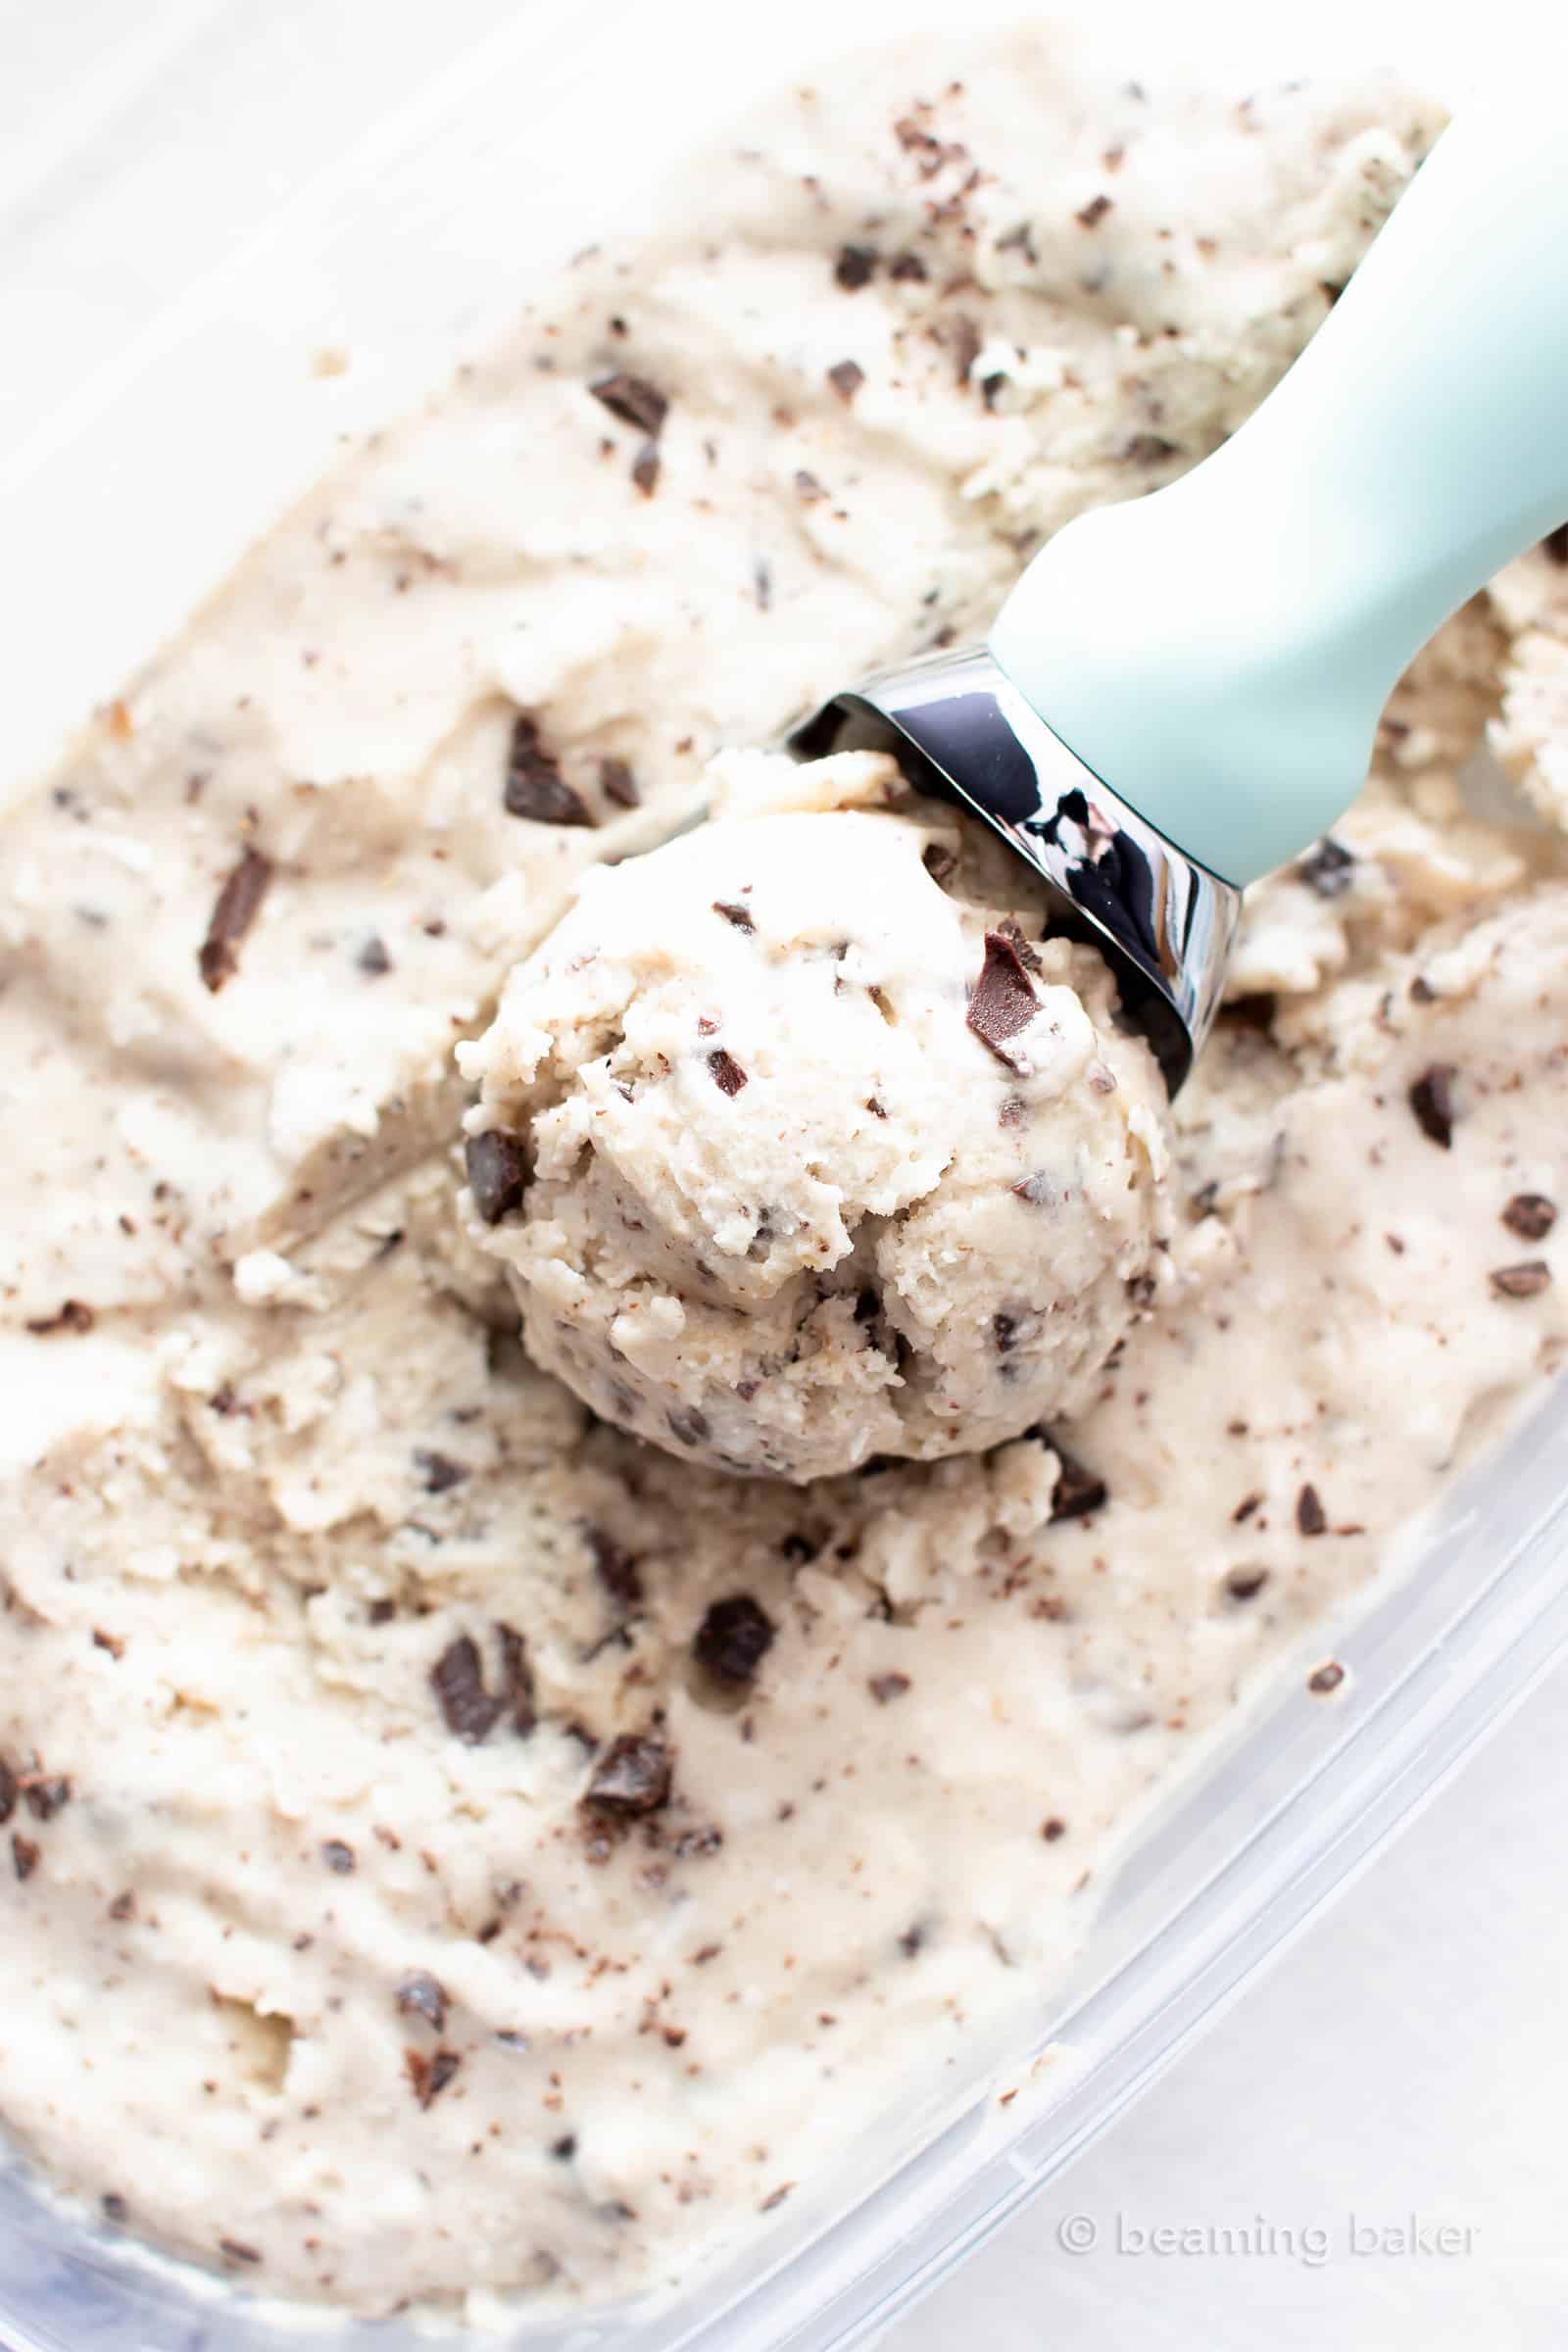 Coconut Chocolate Chip Vegan Ice Cream Recipe: this delicious vegan ice cream recipe is wonderfully rich ‘n creamy! The best homemade vegan ice cream—packed with coconut & chocolate chips, no churn. #Vegan #IceCream #Coconut #ChocolateChip #VeganIceCream | Recipe at BeamingBaker.com